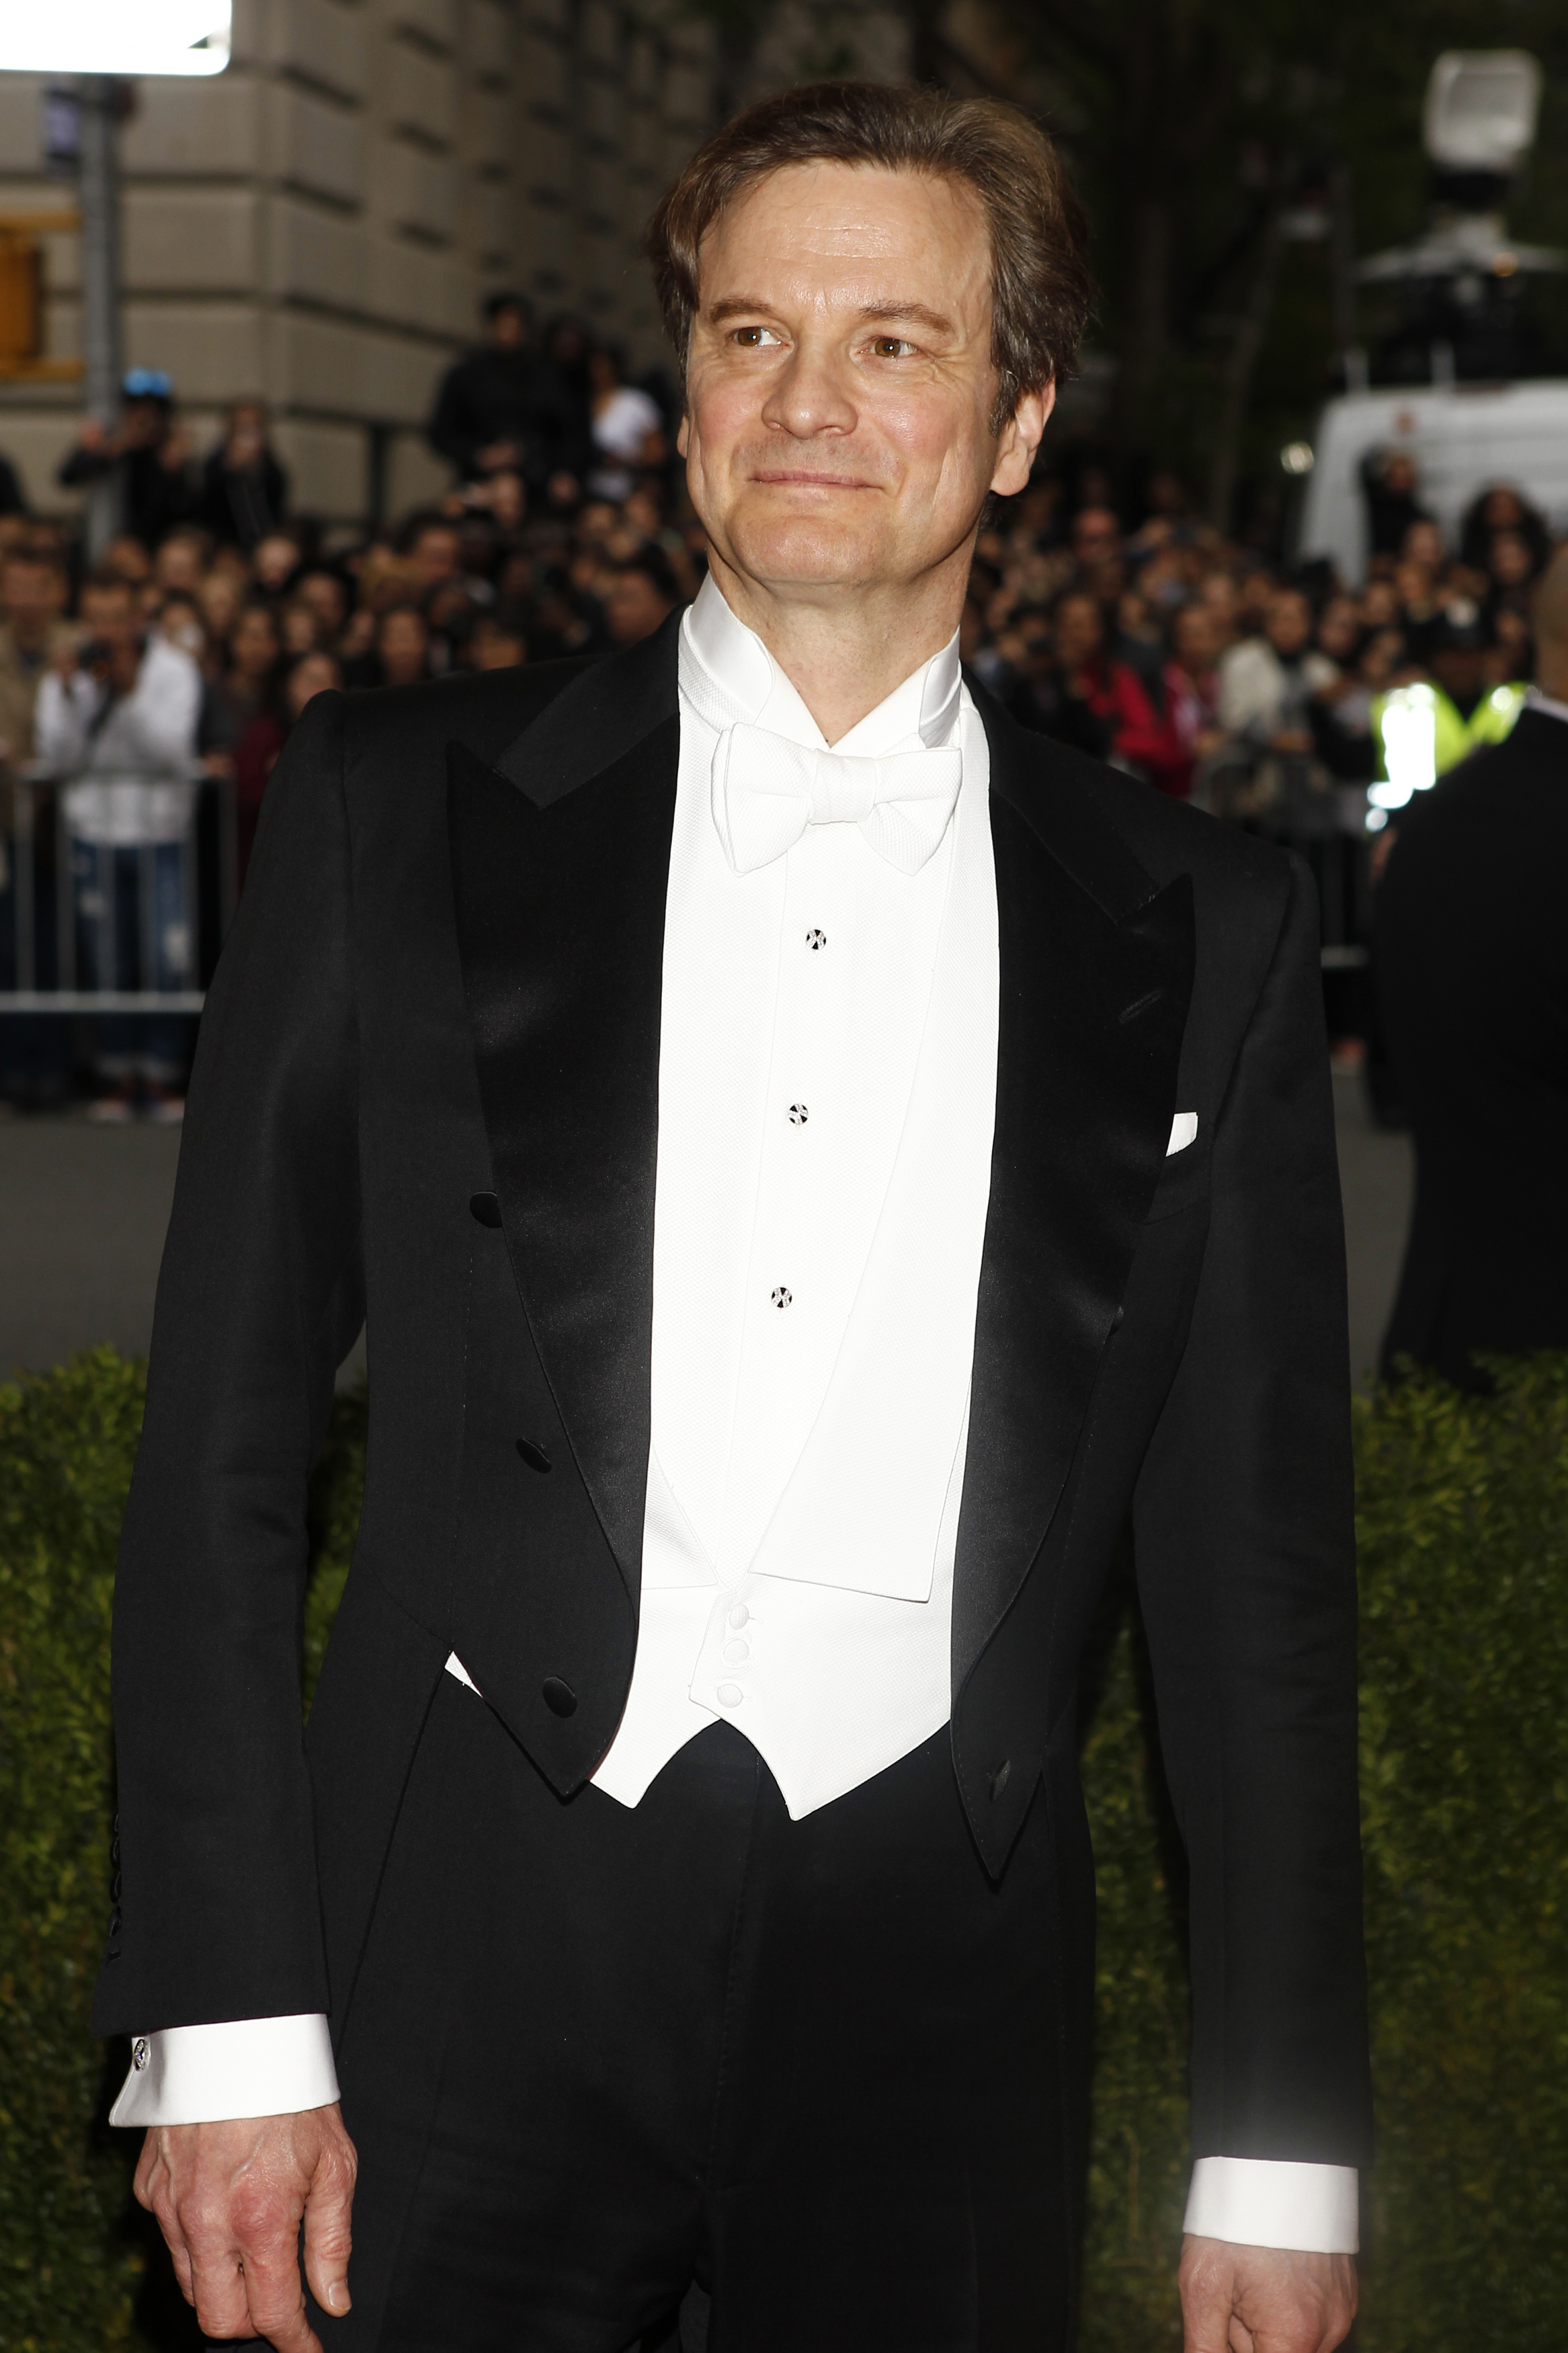 Actor Colin Firth arrives at the Metropolitan Museum of Art Costume Institute Gala Benefit in Manhattan on May 5, 2014 (Carlo Allegri—Reuters)